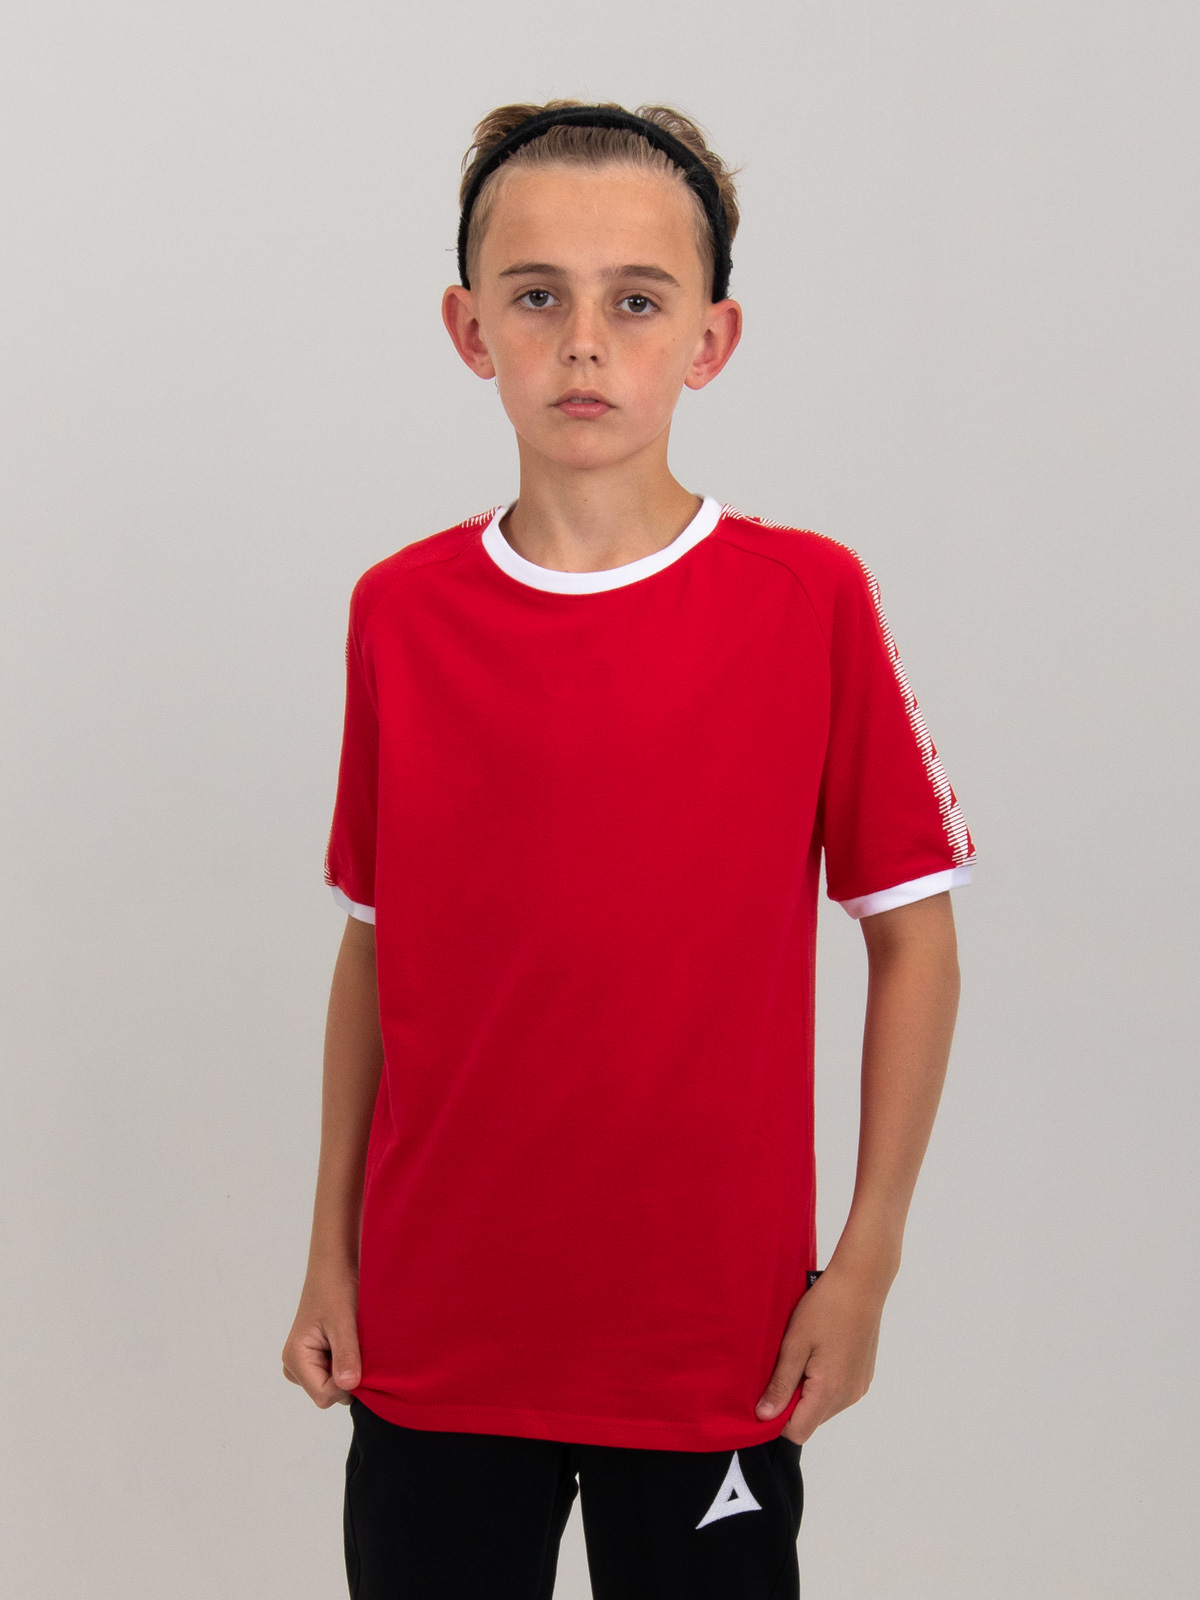 a kids red cotton t-shirt is being worn by a boy